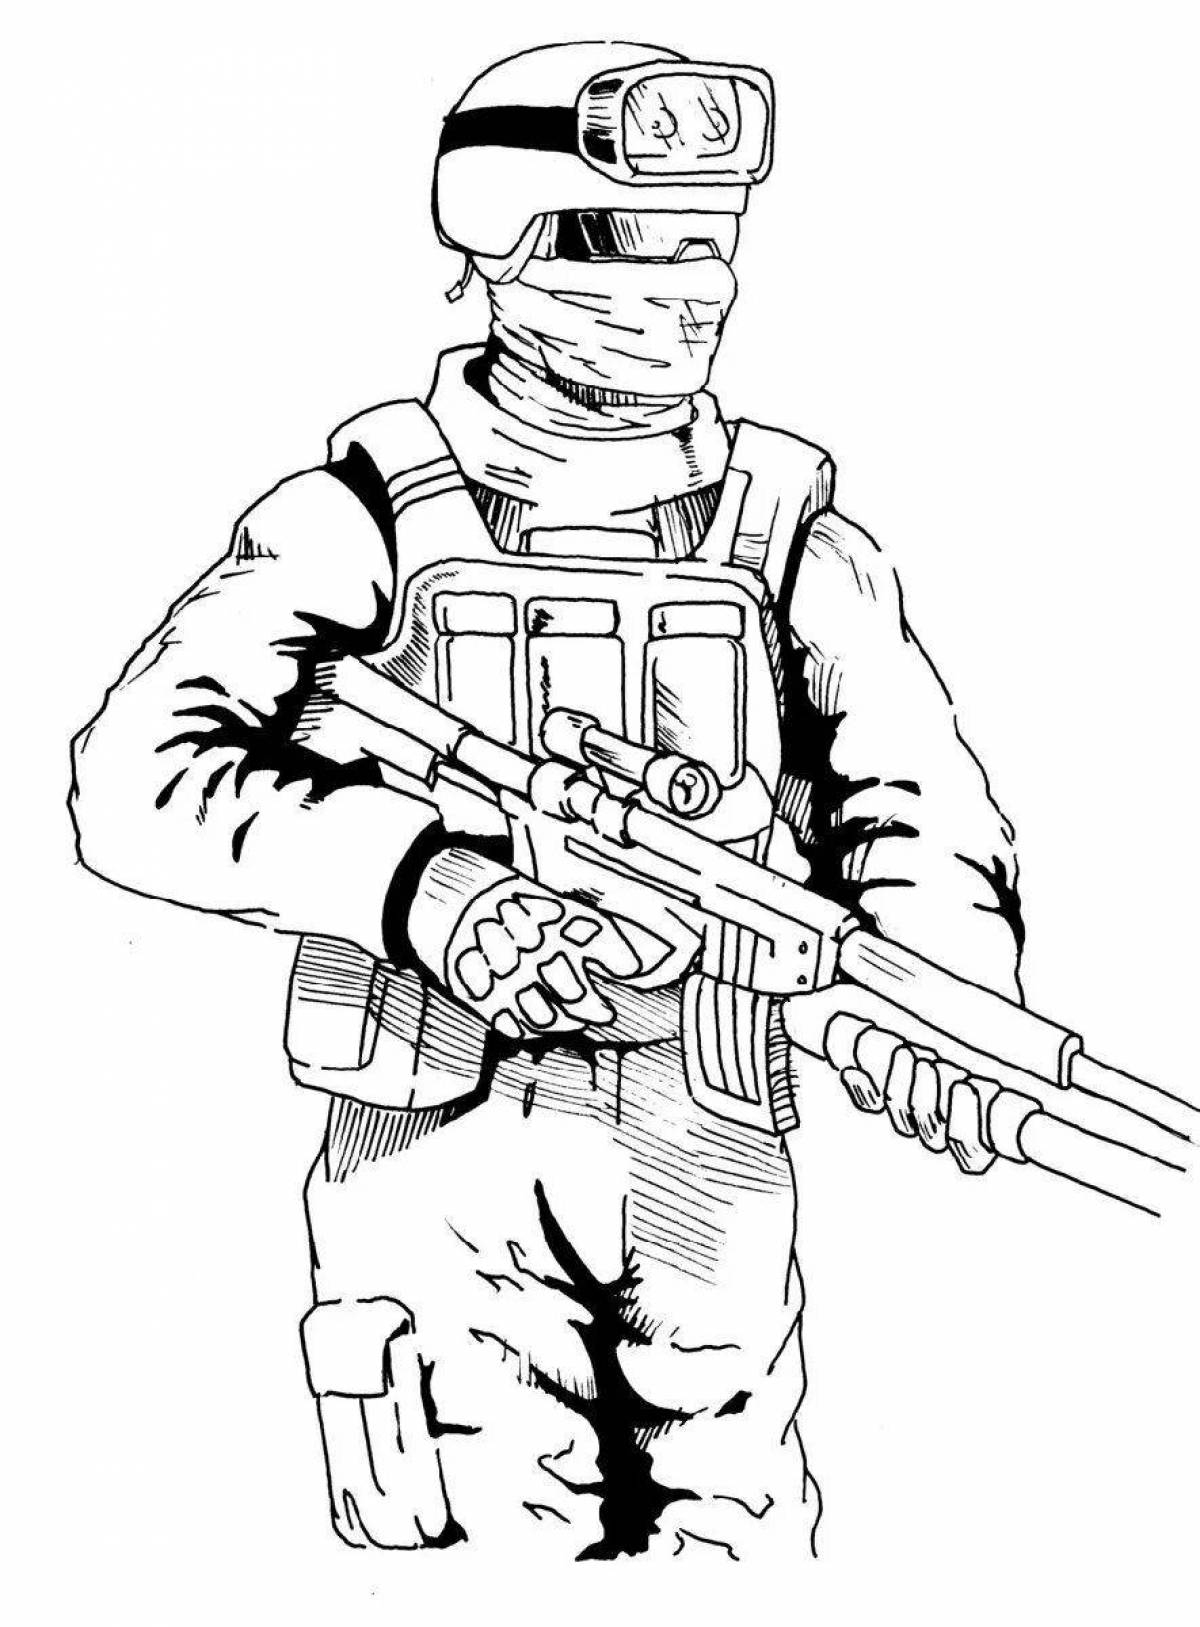 Beautiful call of duty coloring page